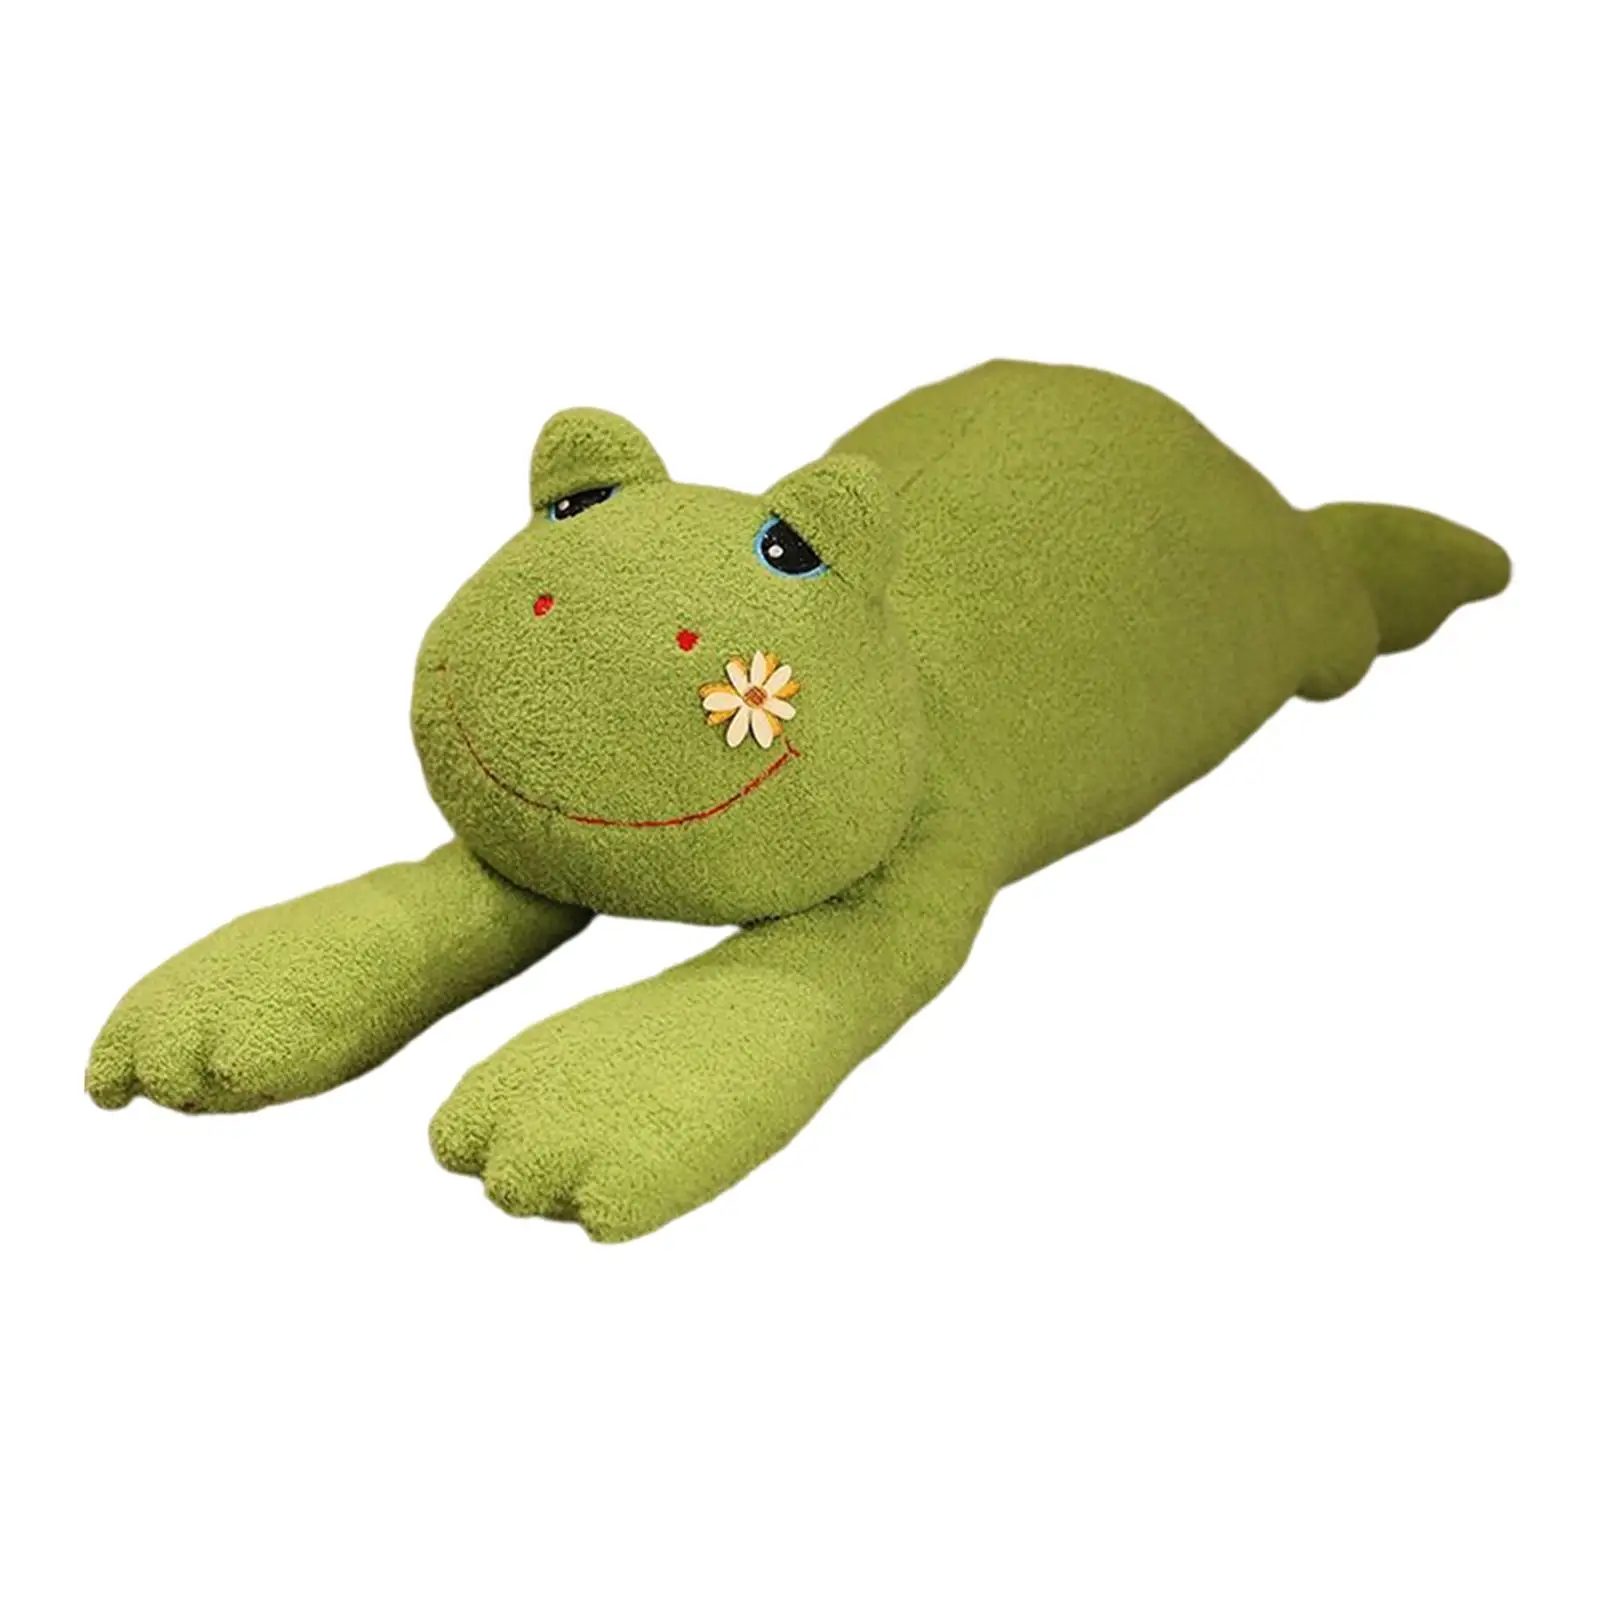 Cuddly Frog Plush Toy Frog pillow Cute Stuffed Animal for Theme Party Sofa Decor Holiday Girlfriend Kids